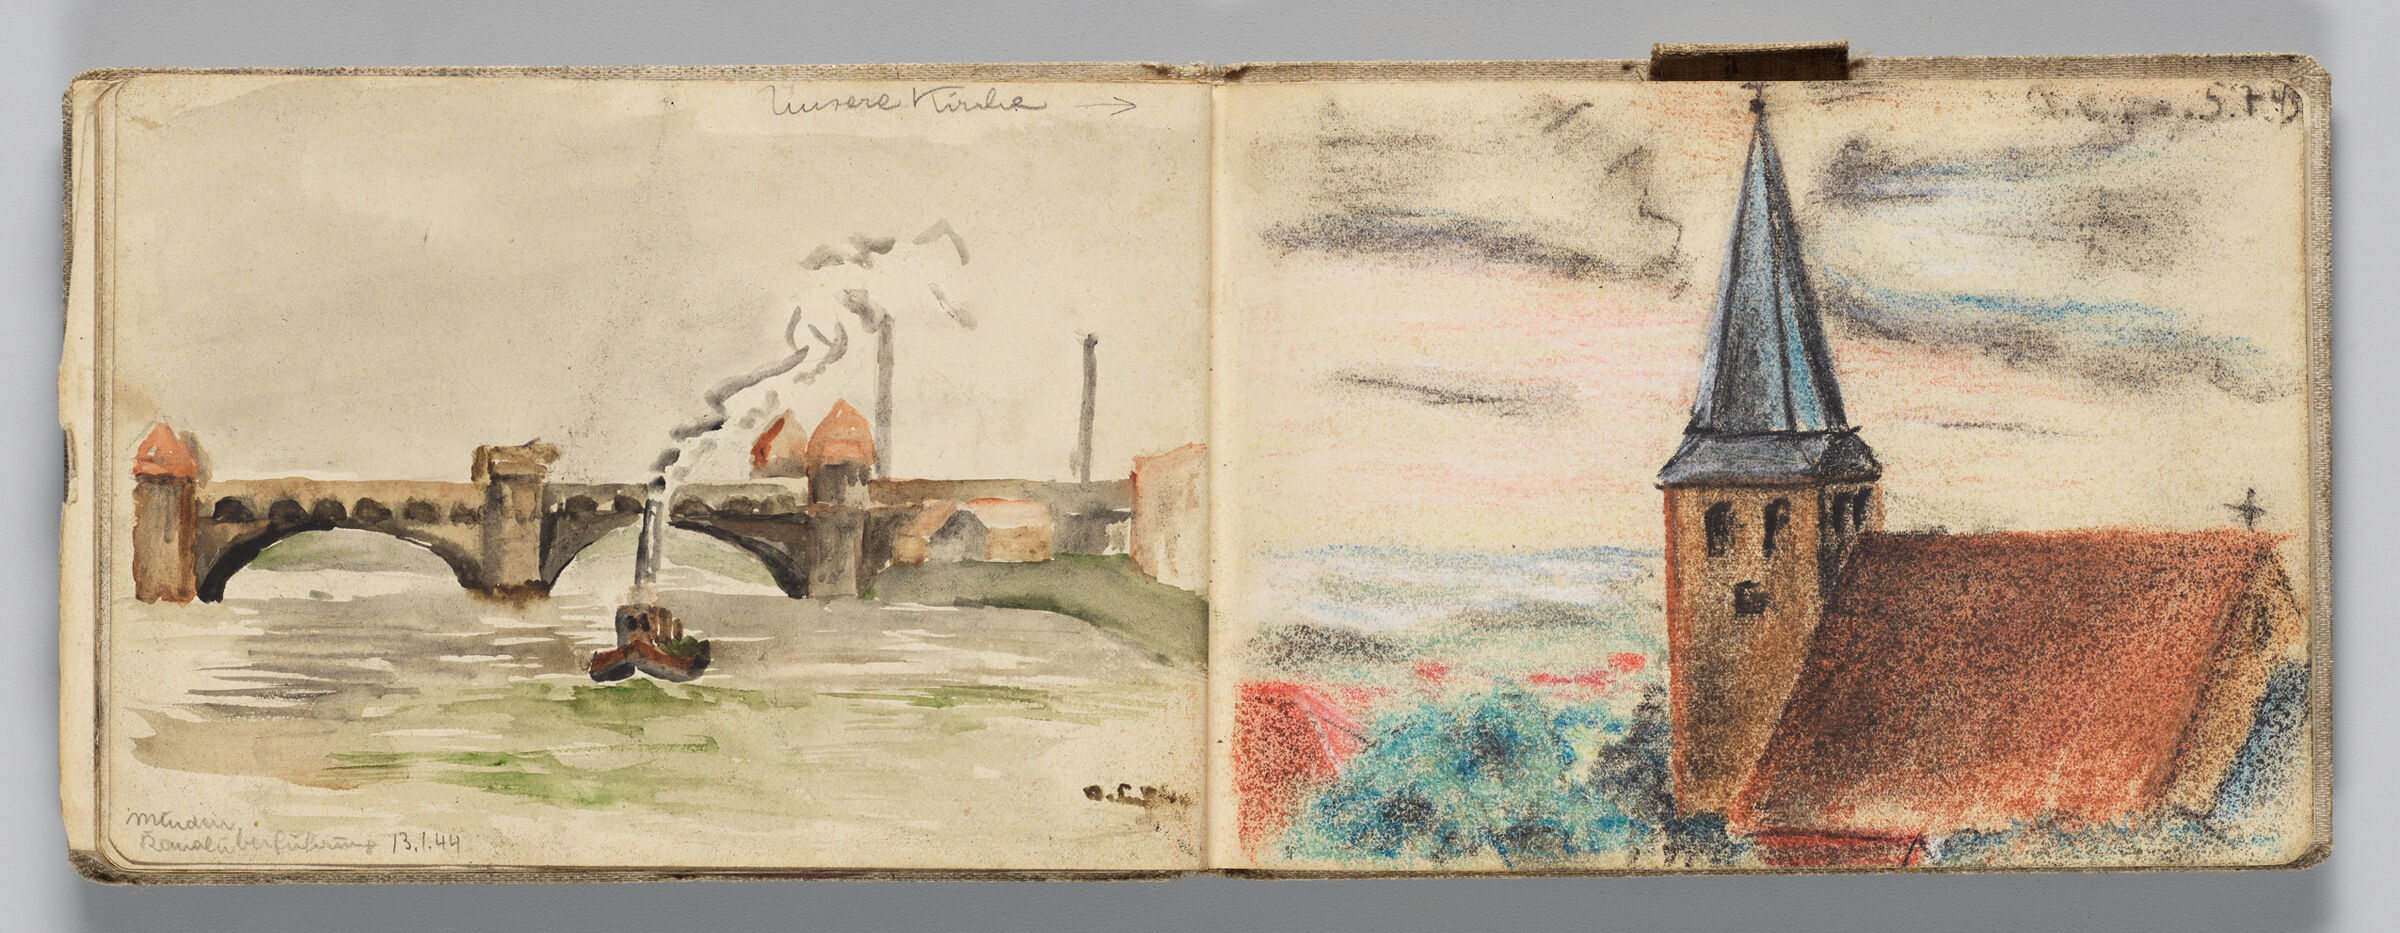 Untitled (Steamboat In Minden, Left Page); Untitled (Sketch Of Artist's Hometown Church, Right Page)